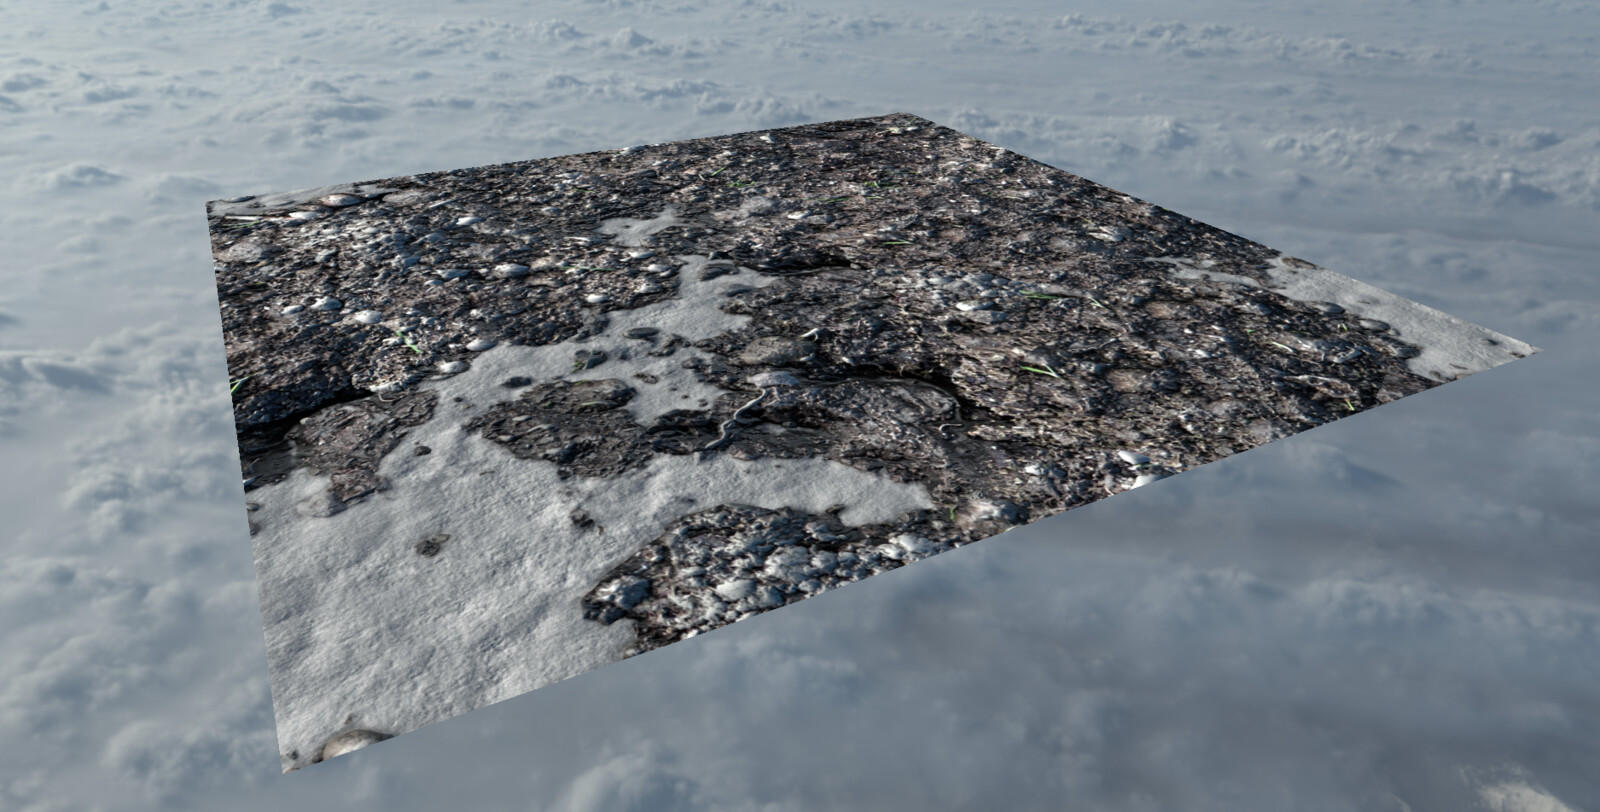 Creating some different groundmaterial using Substance Alchemist.